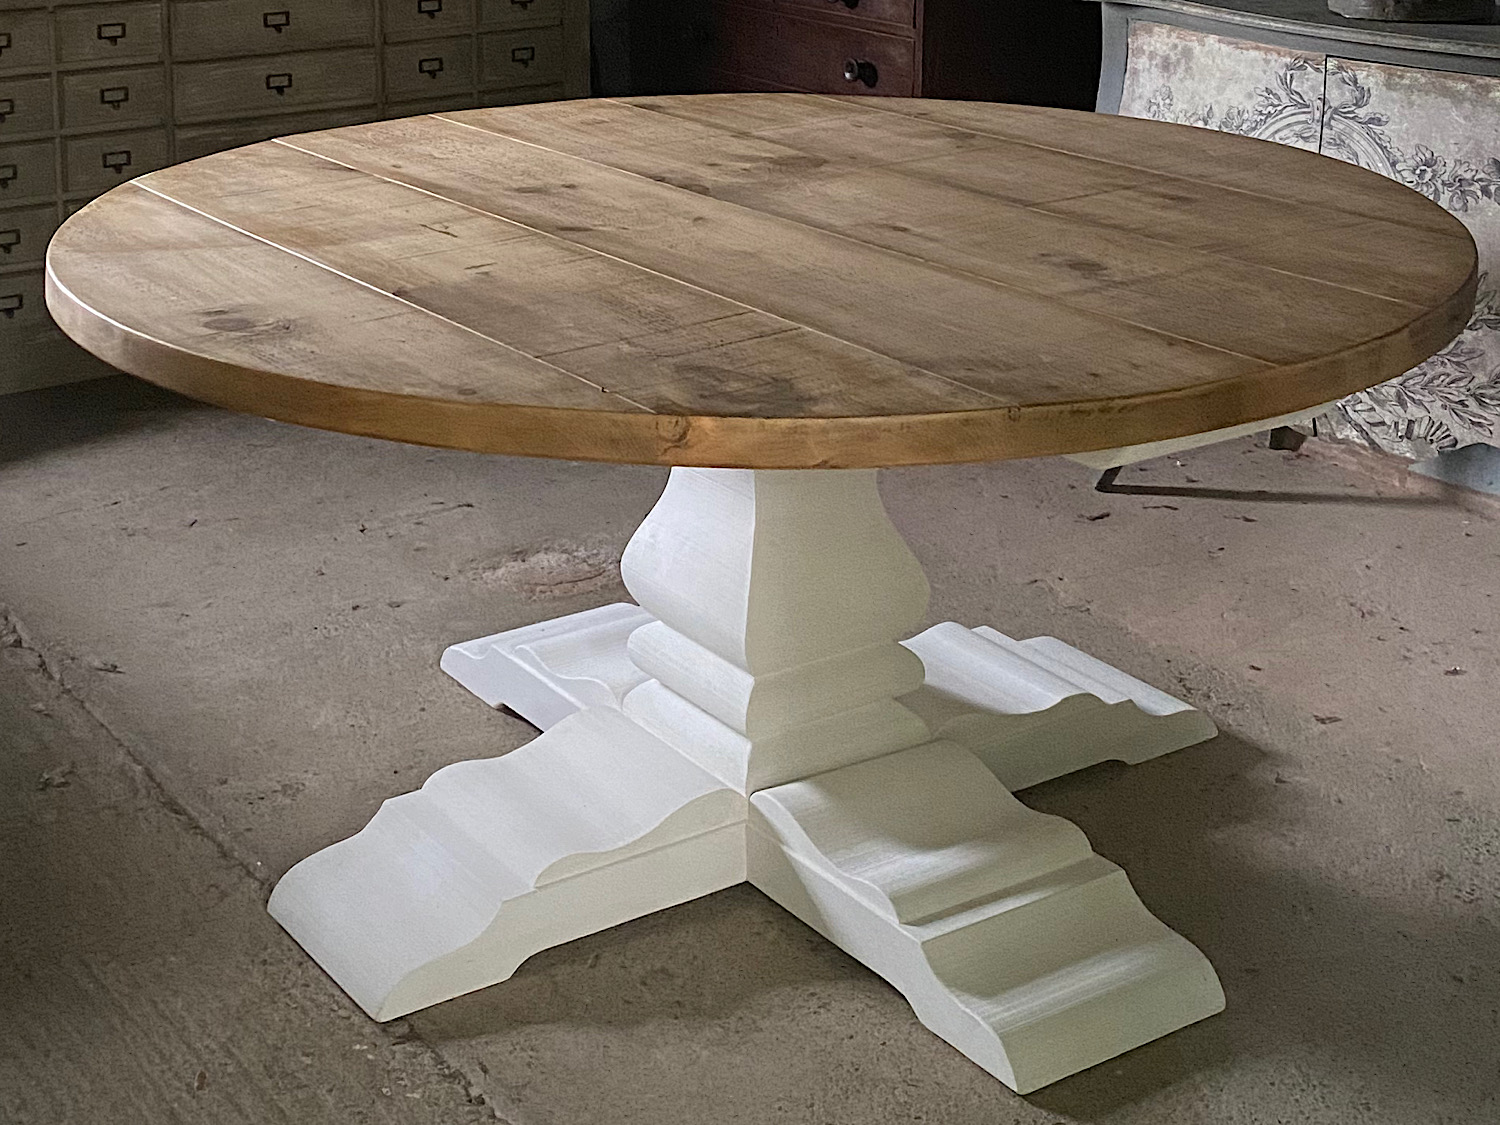 Large Round Rustic Dining Table